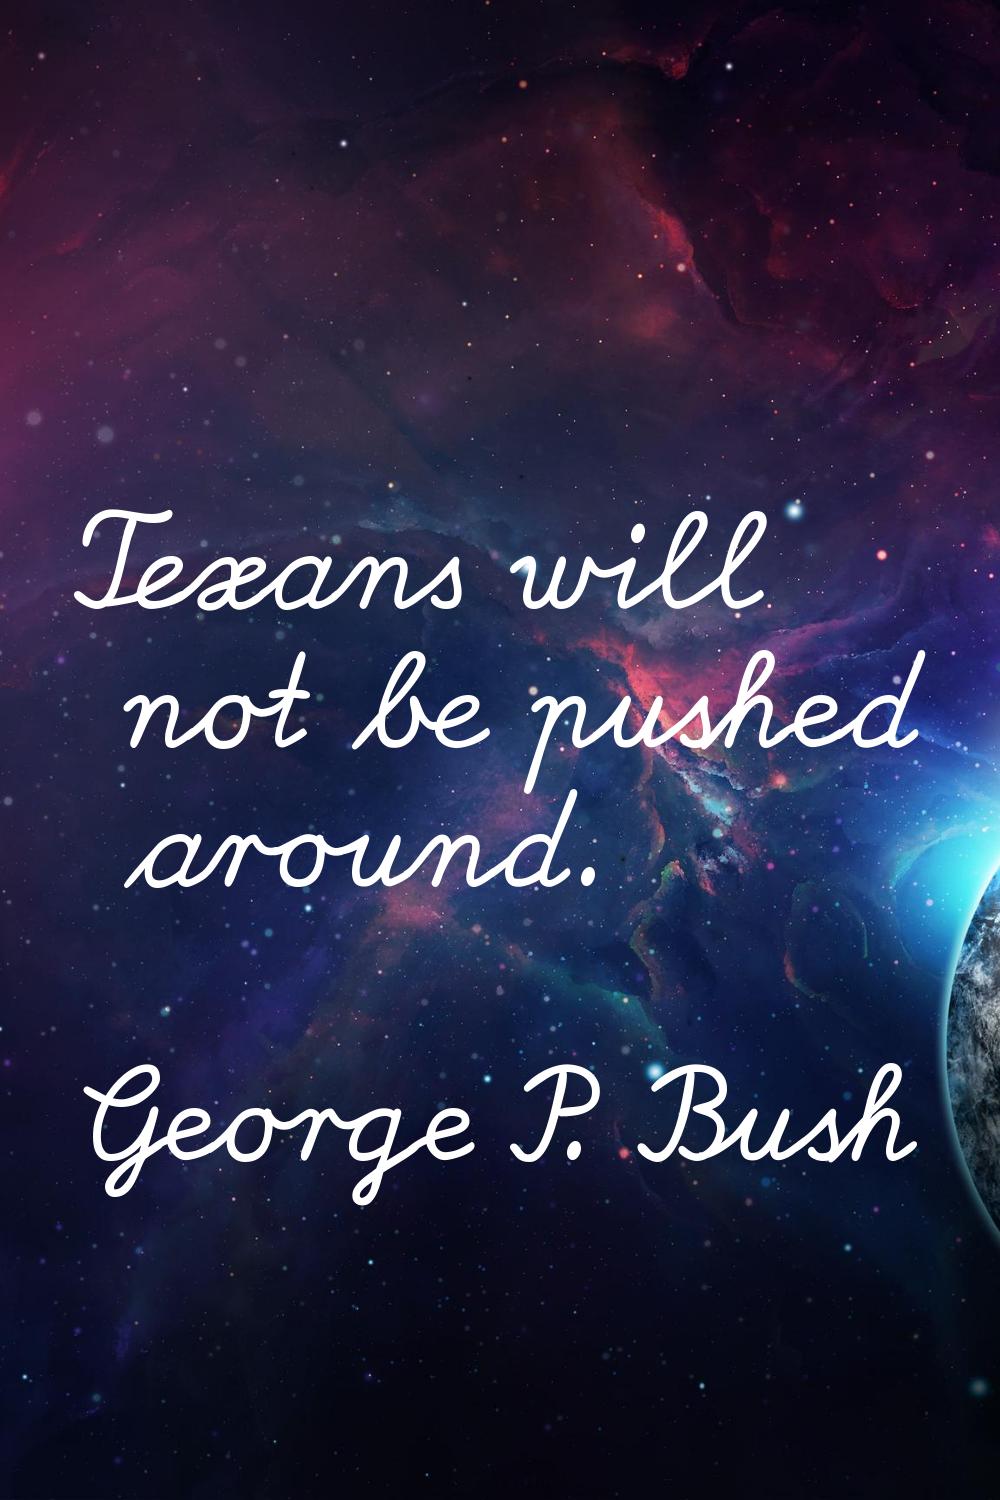 Texans will not be pushed around.